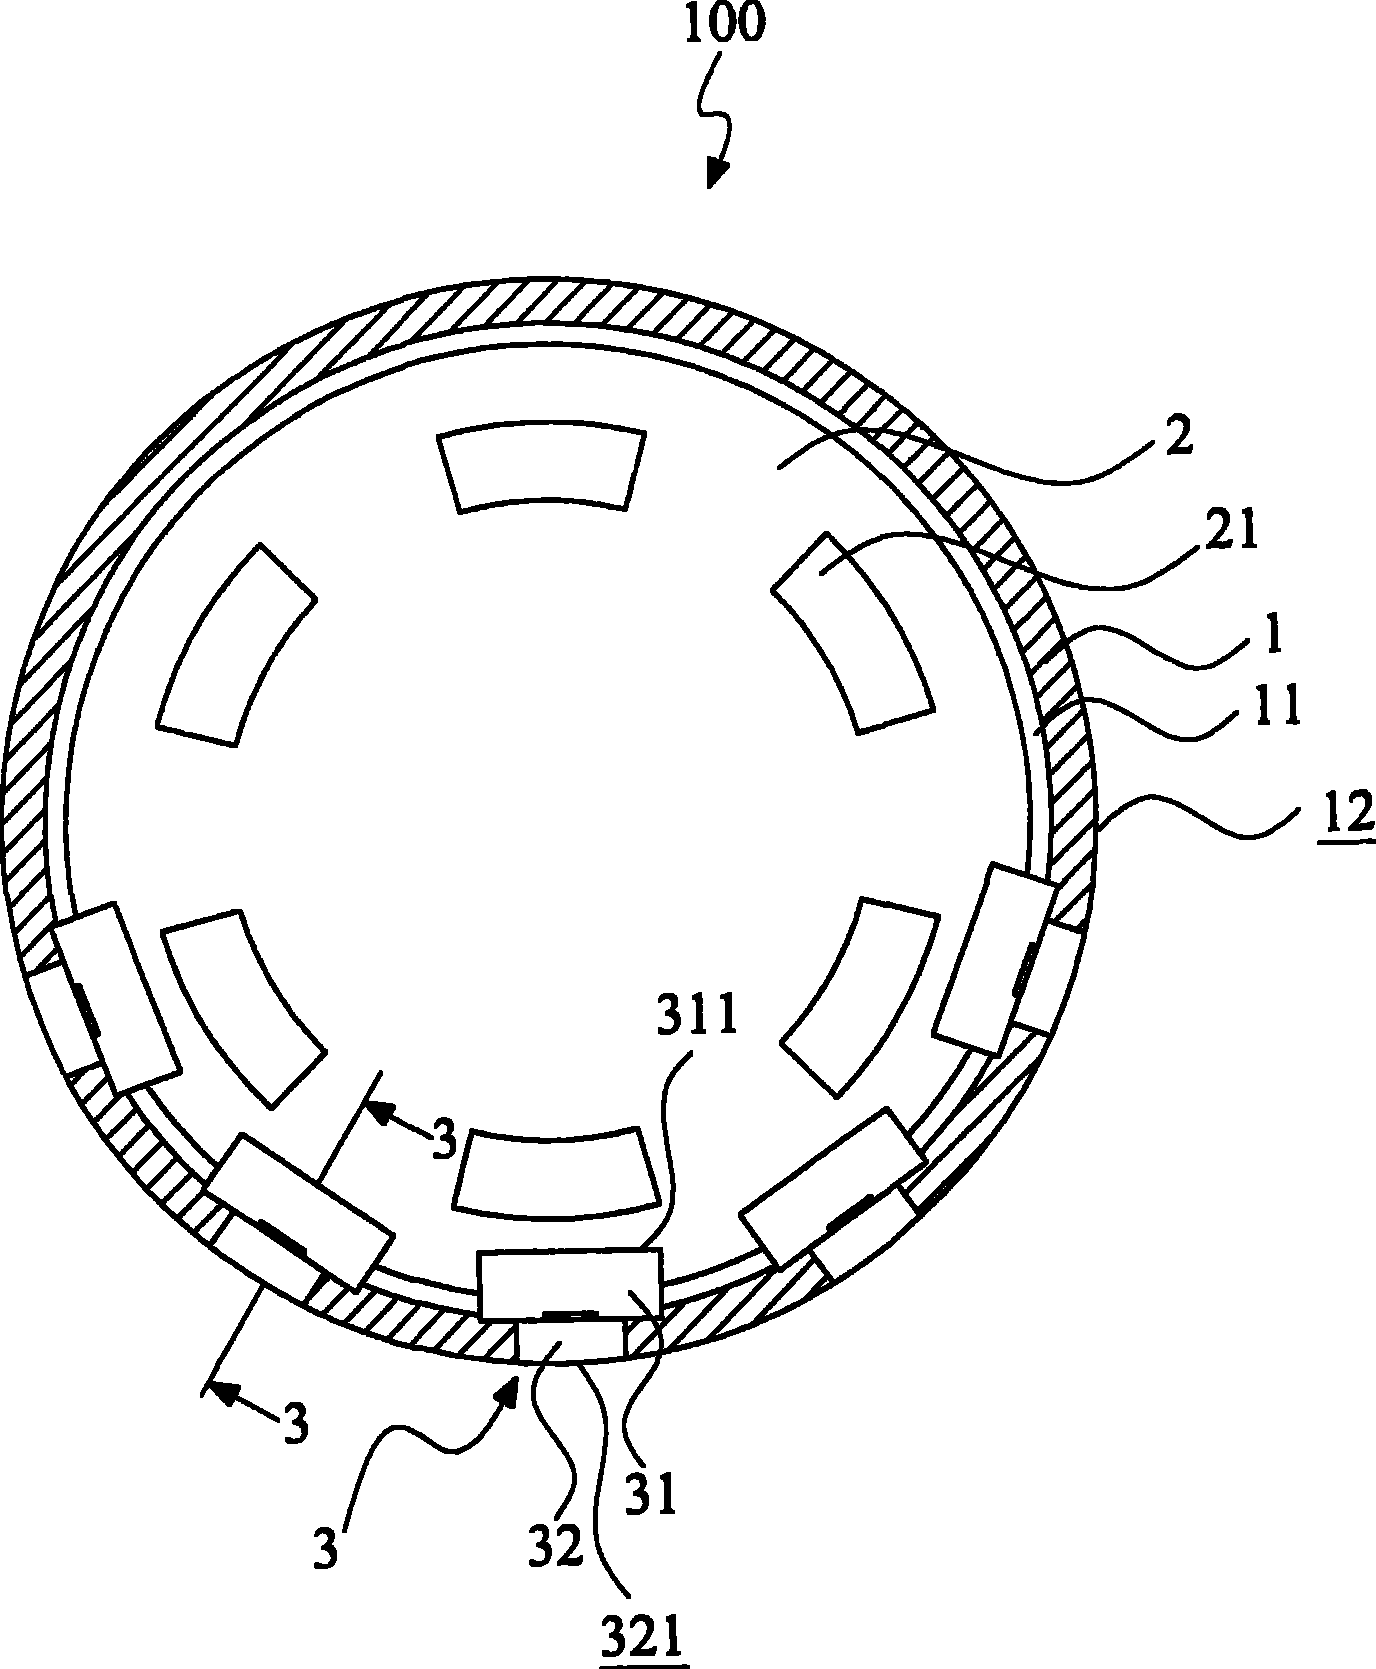 Endoscope capsule with metal implanting contact points